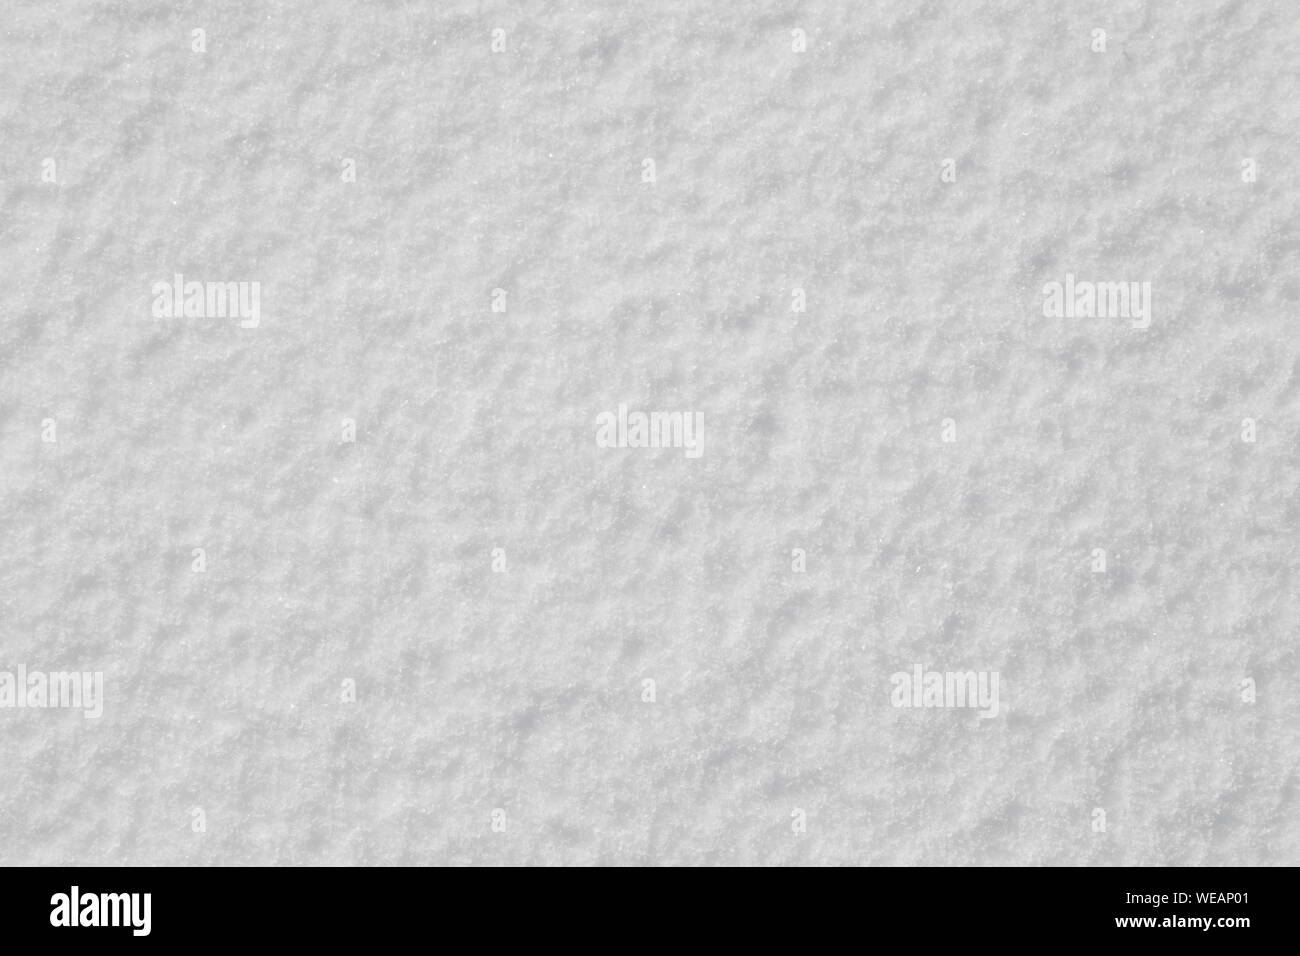 snow grain pattern texture or white abstract background Stock Photo